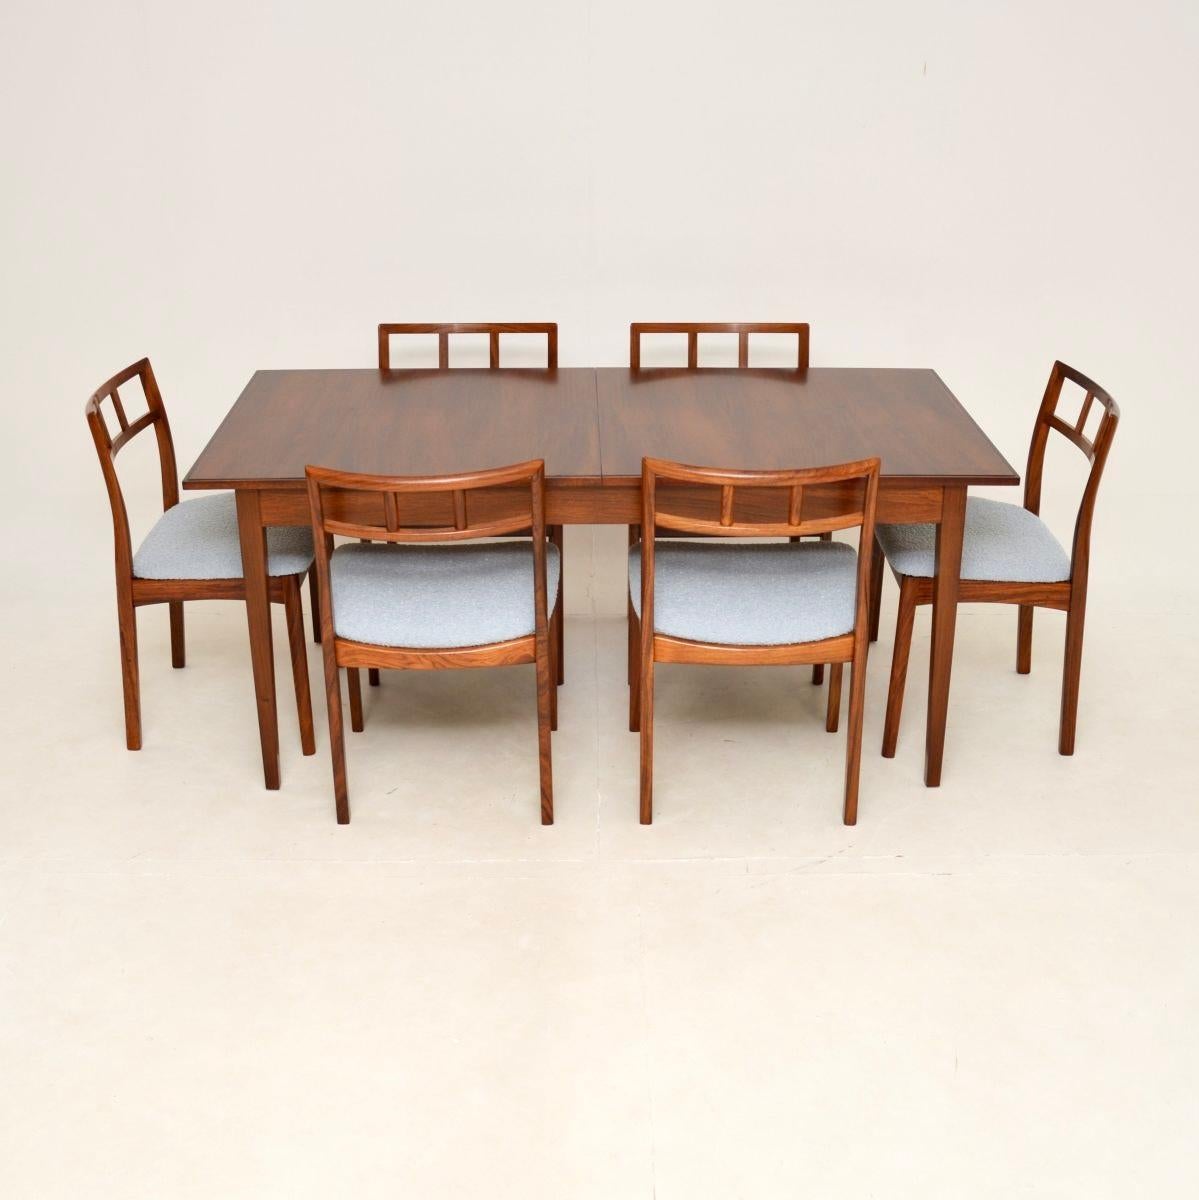 A stunning vintage dining table and six chairs by Robert Heritage for Archie Shine. It was made in England, it dates from the 1960’s.

We have had this fully restored, it is in immaculate condition. The table and chairs have been stripped and